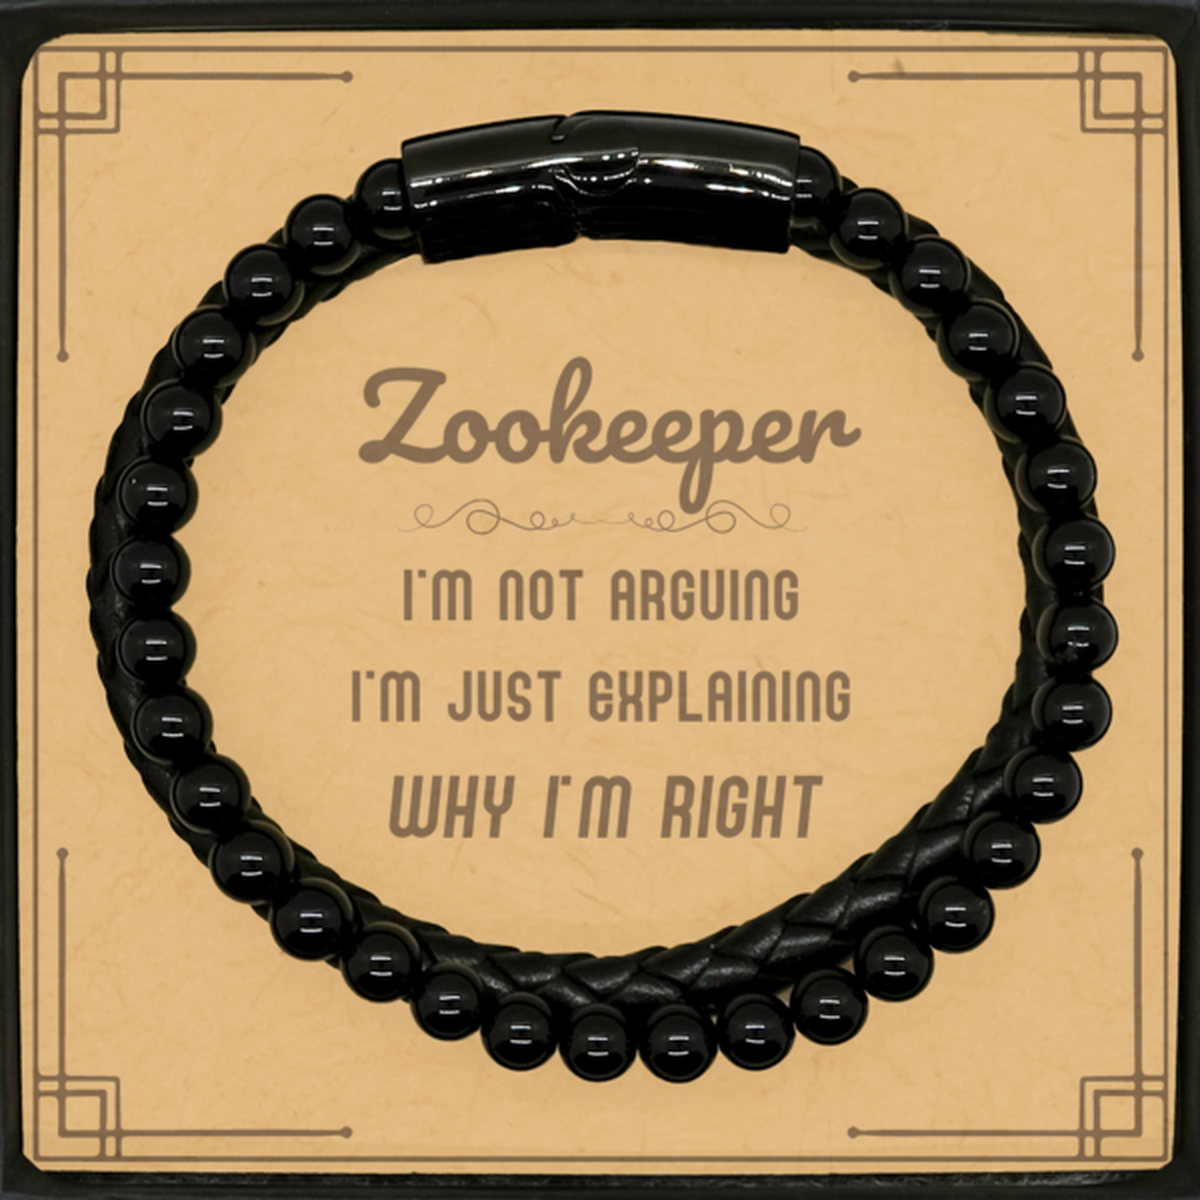 Zookeeper I'm not Arguing. I'm Just Explaining Why I'm RIGHT Stone Leather Bracelets, Funny Saying Quote Zookeeper Gifts For Zookeeper Message Card Graduation Birthday Christmas Gifts for Men Women Coworker